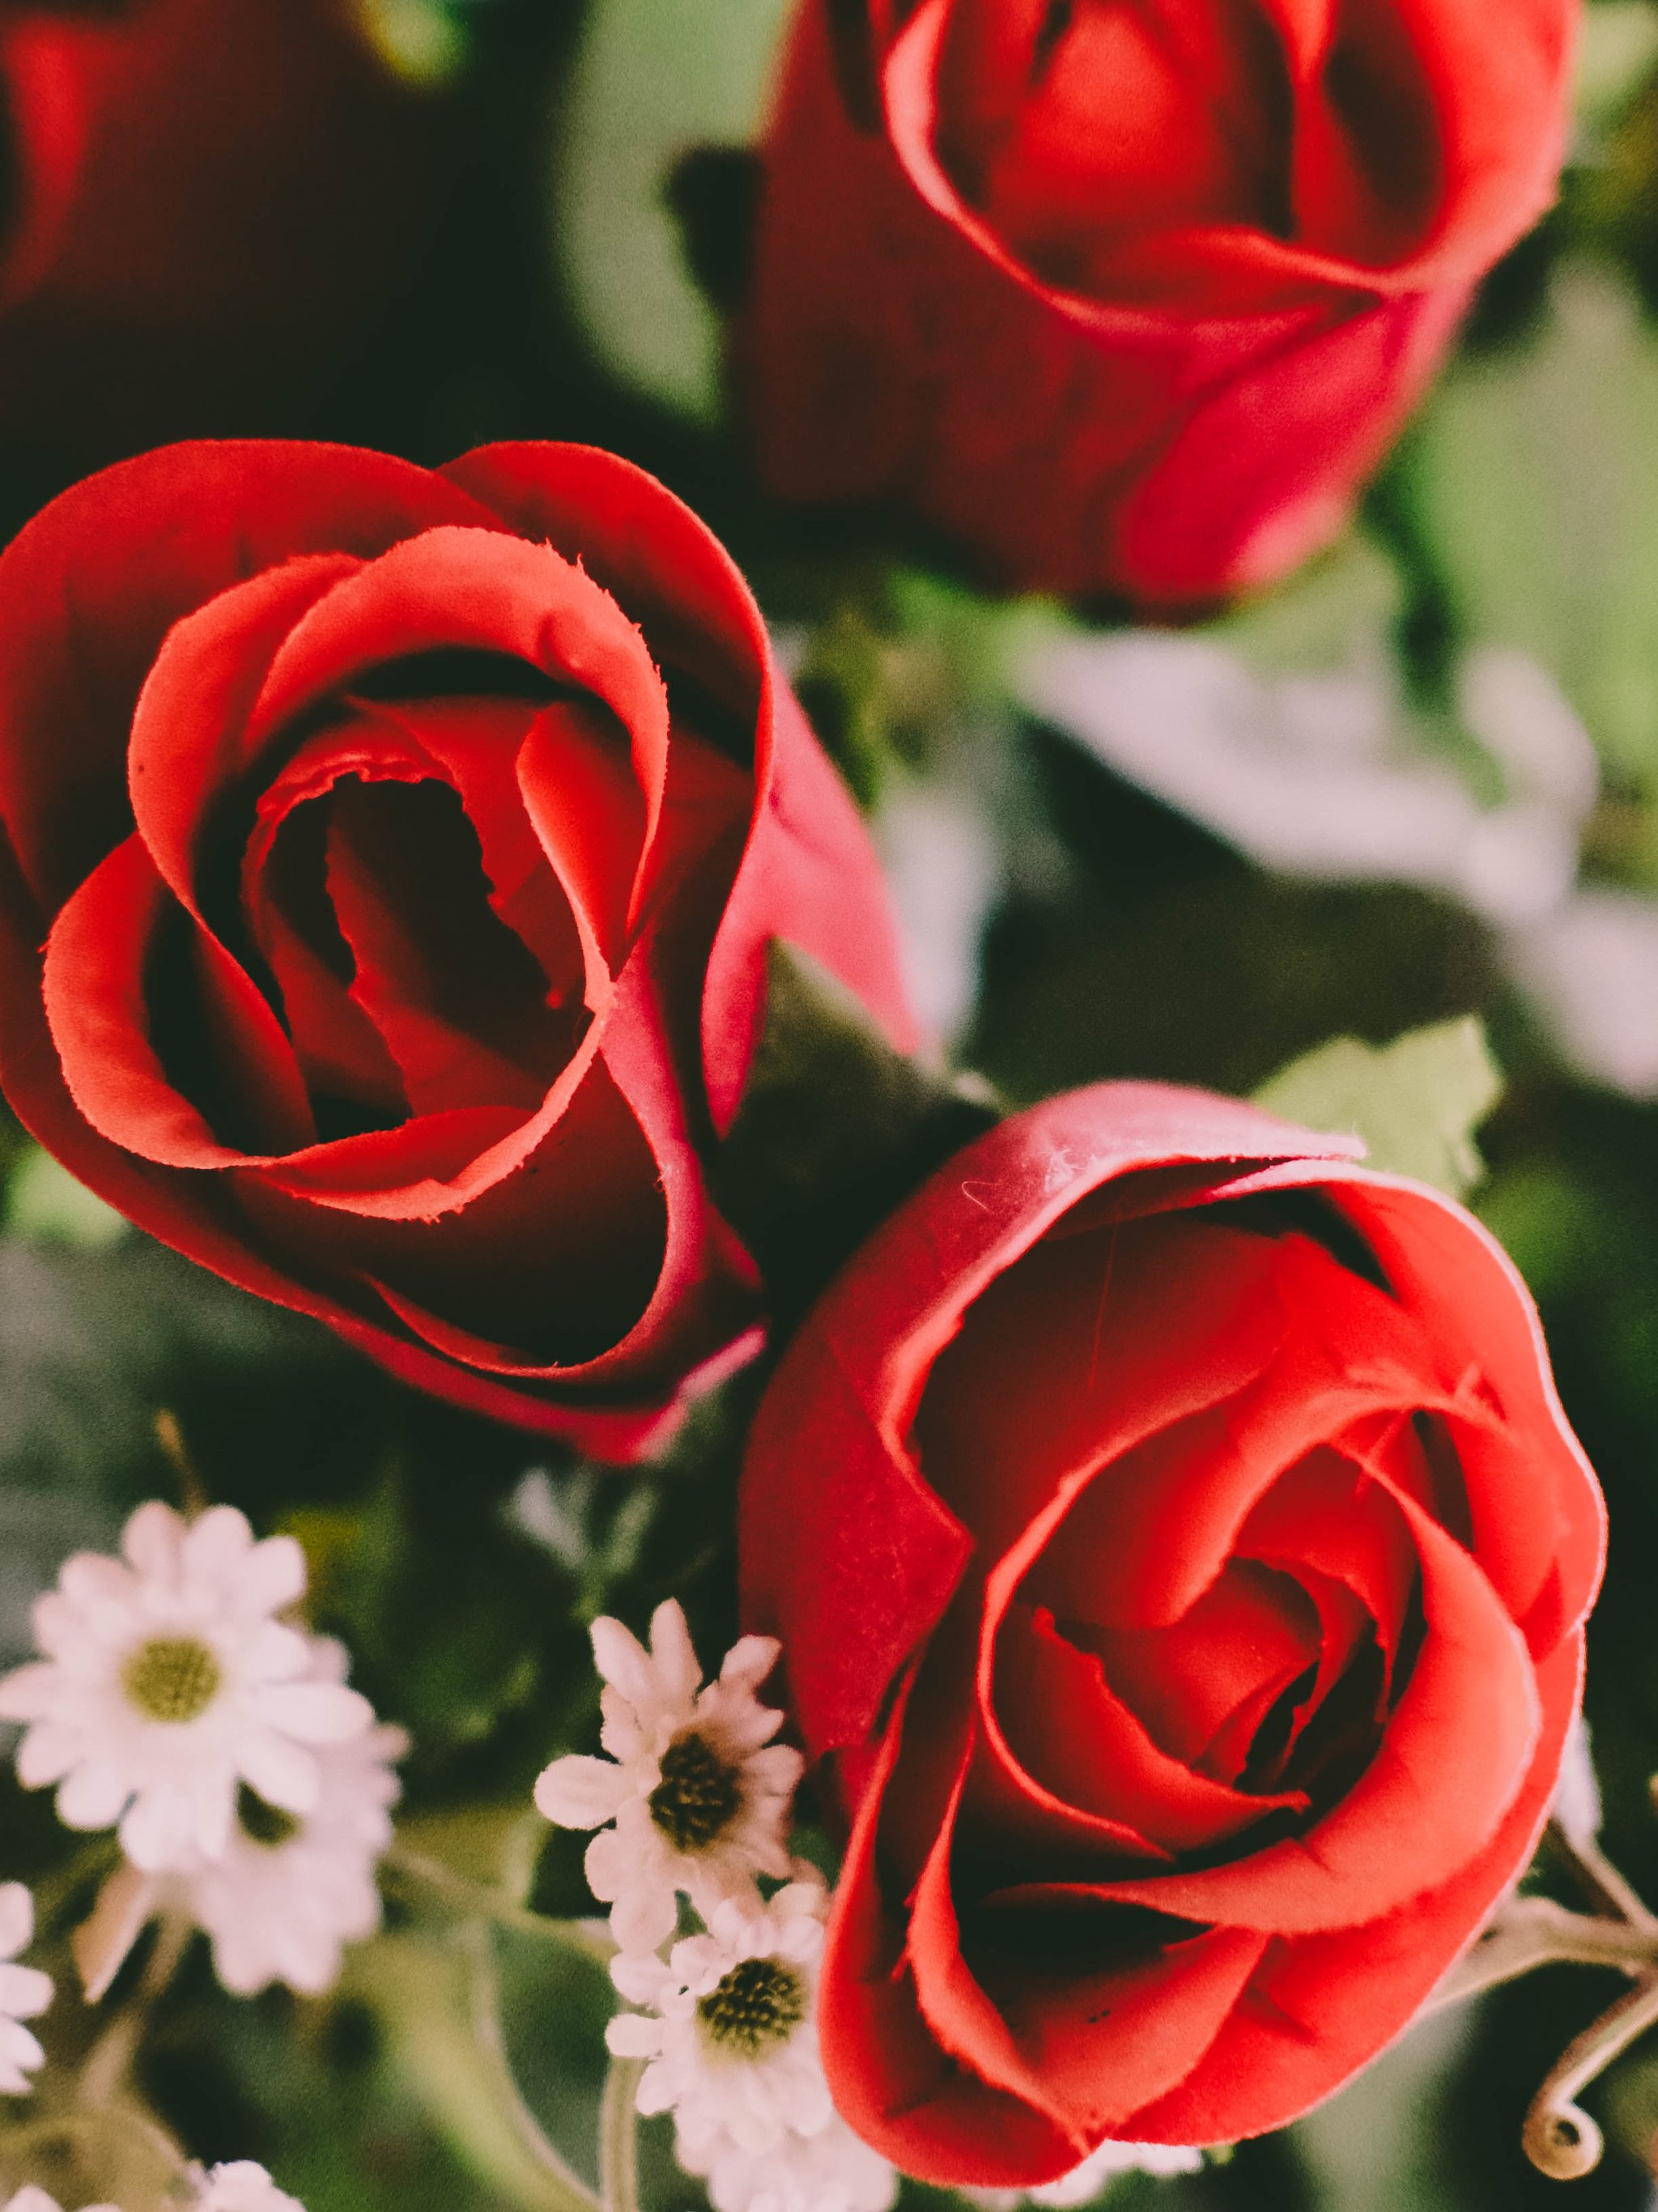 Red Roses Wallpaper - iPhone, Android Desktop Backgrounds